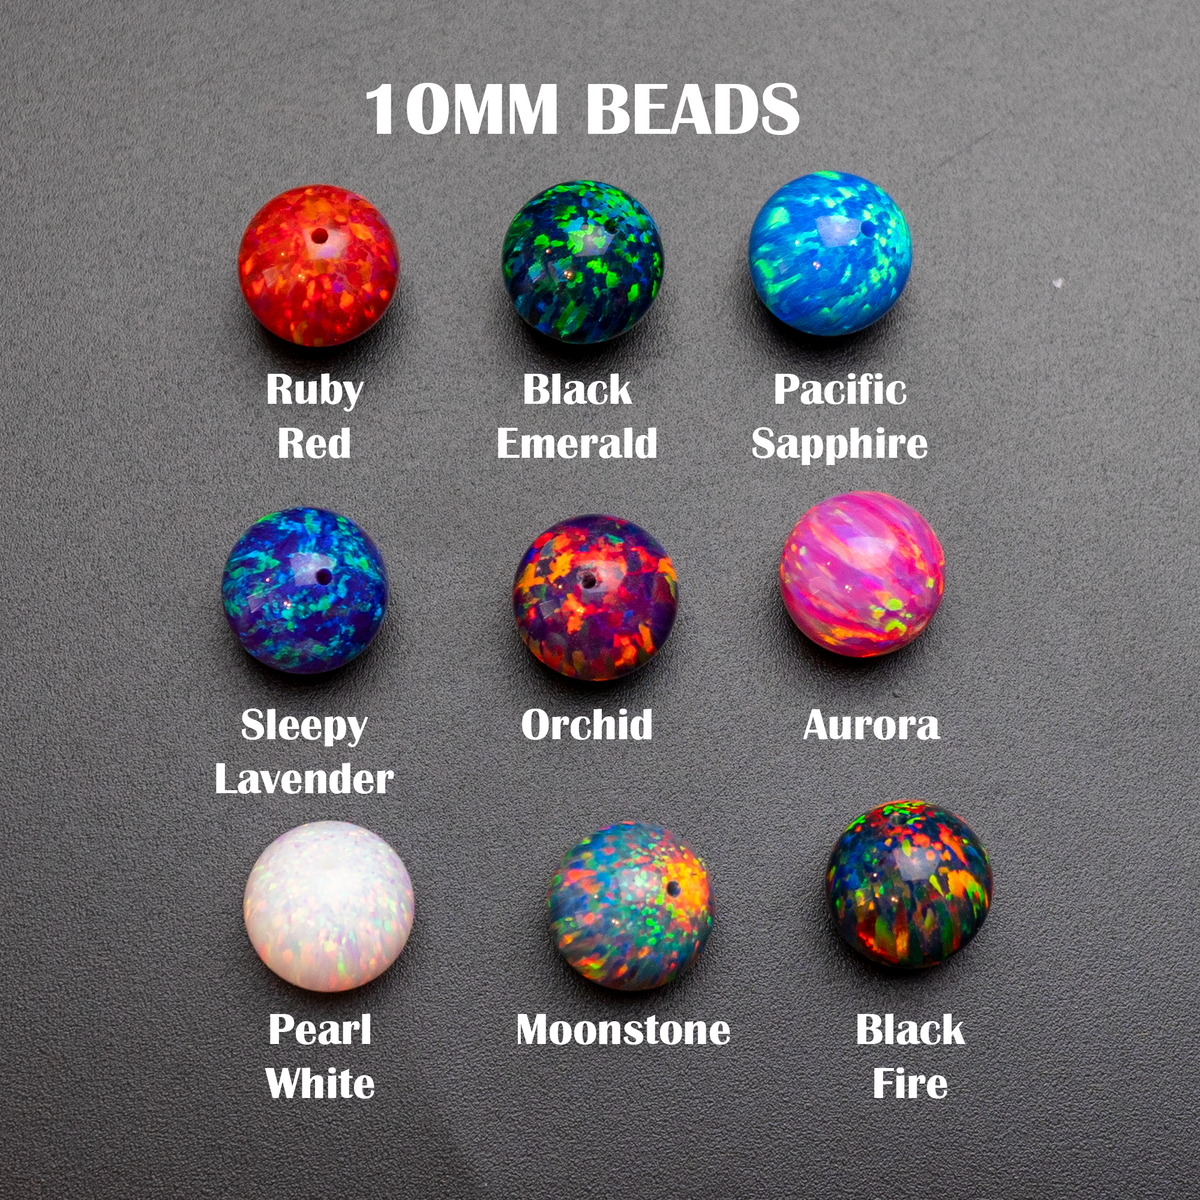 Rainbow Opal Beads - Multi Pack of 8mm Opal Beads - Beads for